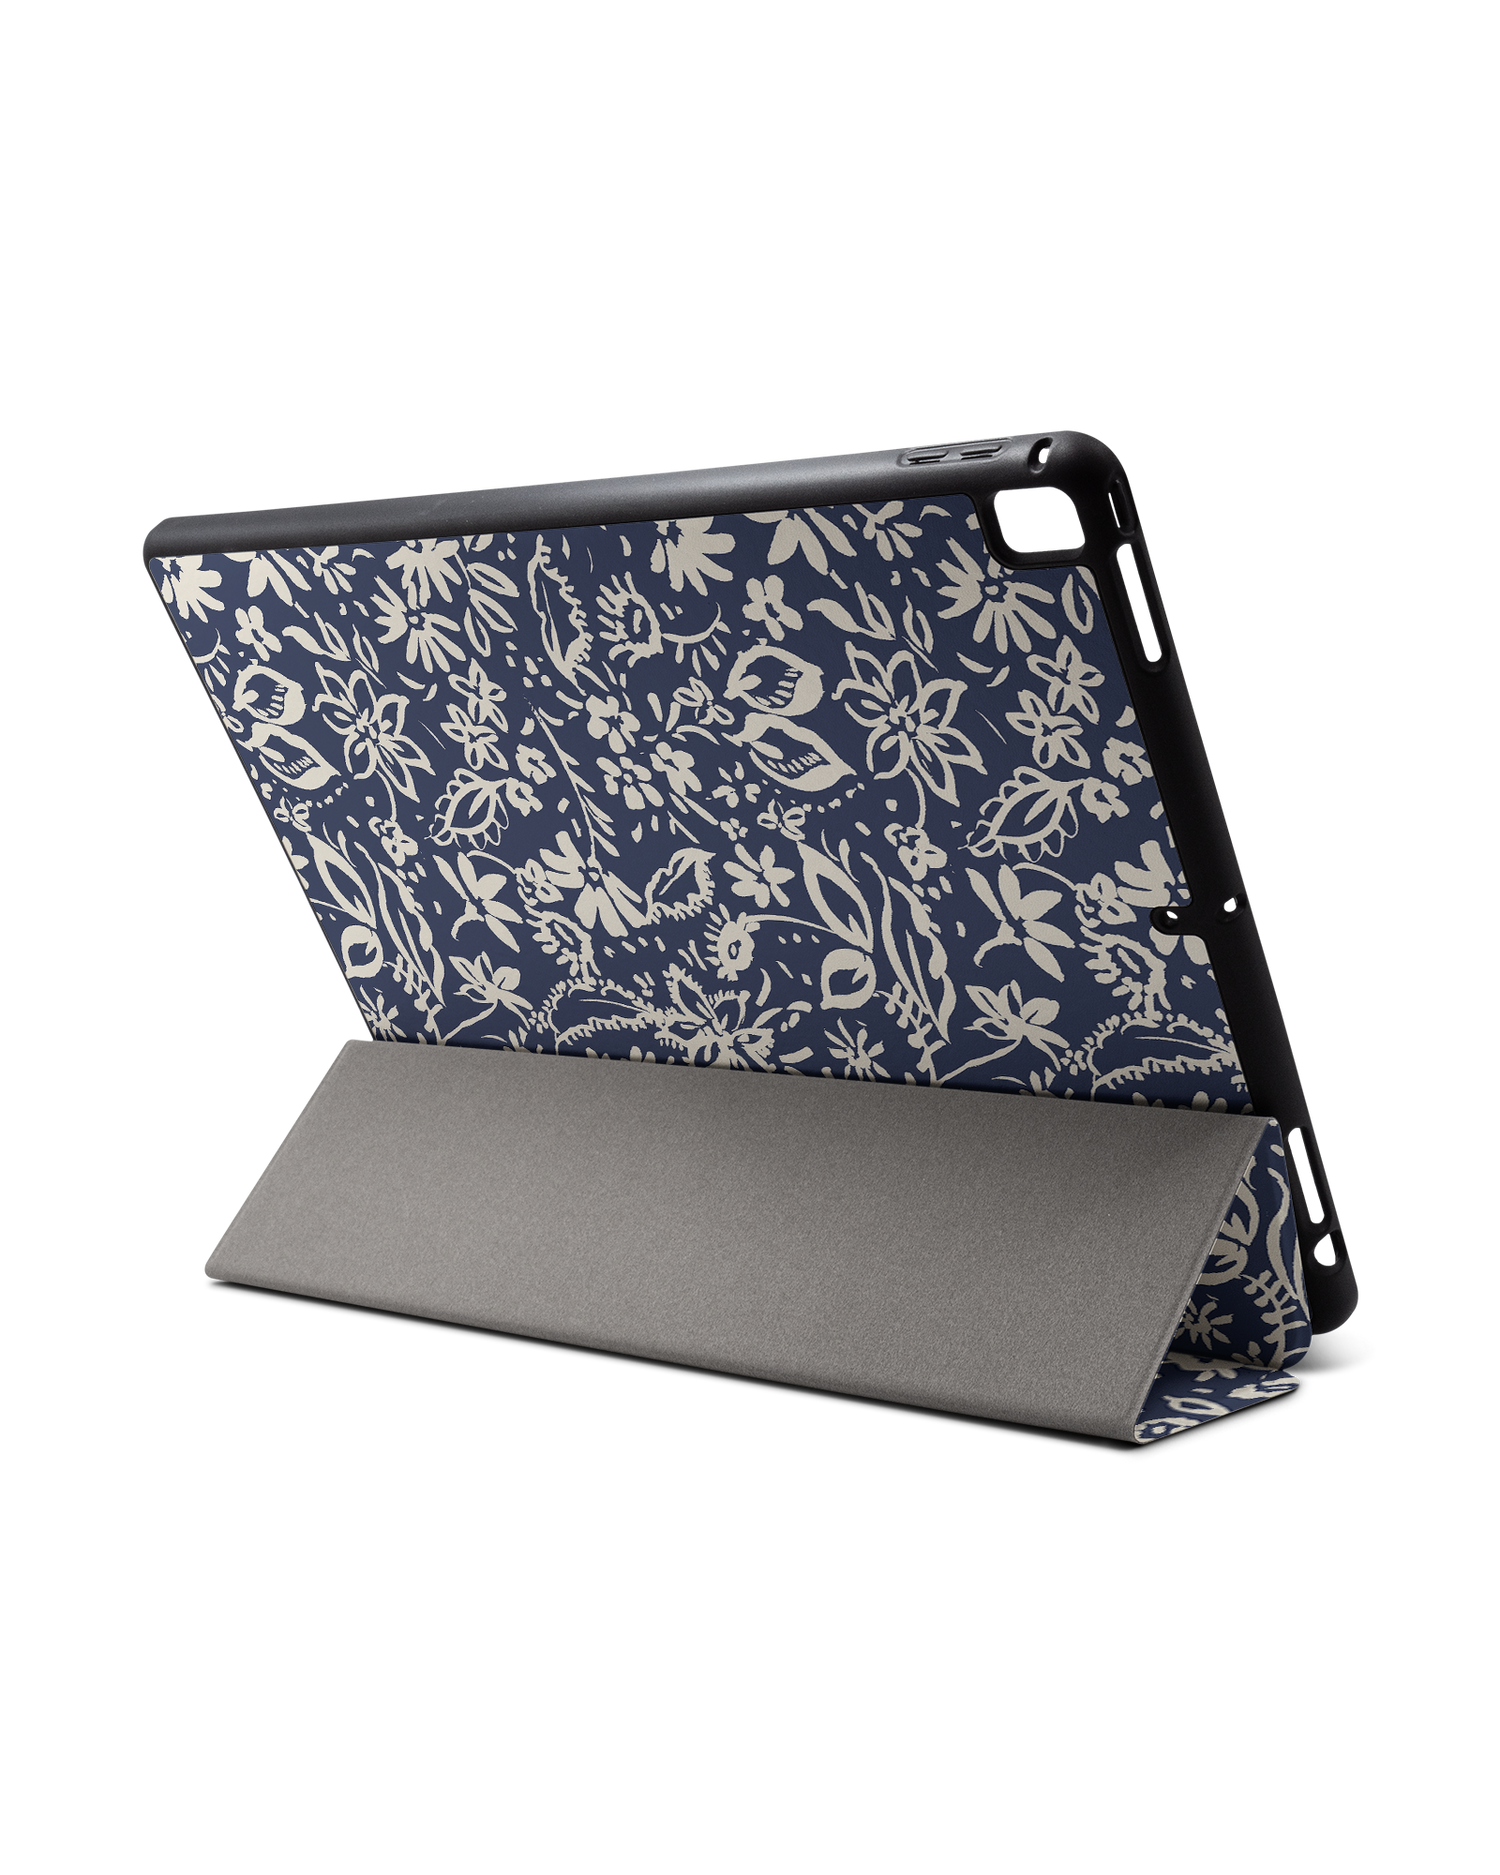 Ditsy Blue Paisley iPad Case with Pencil Holder for Apple iPad Pro 2 12.9